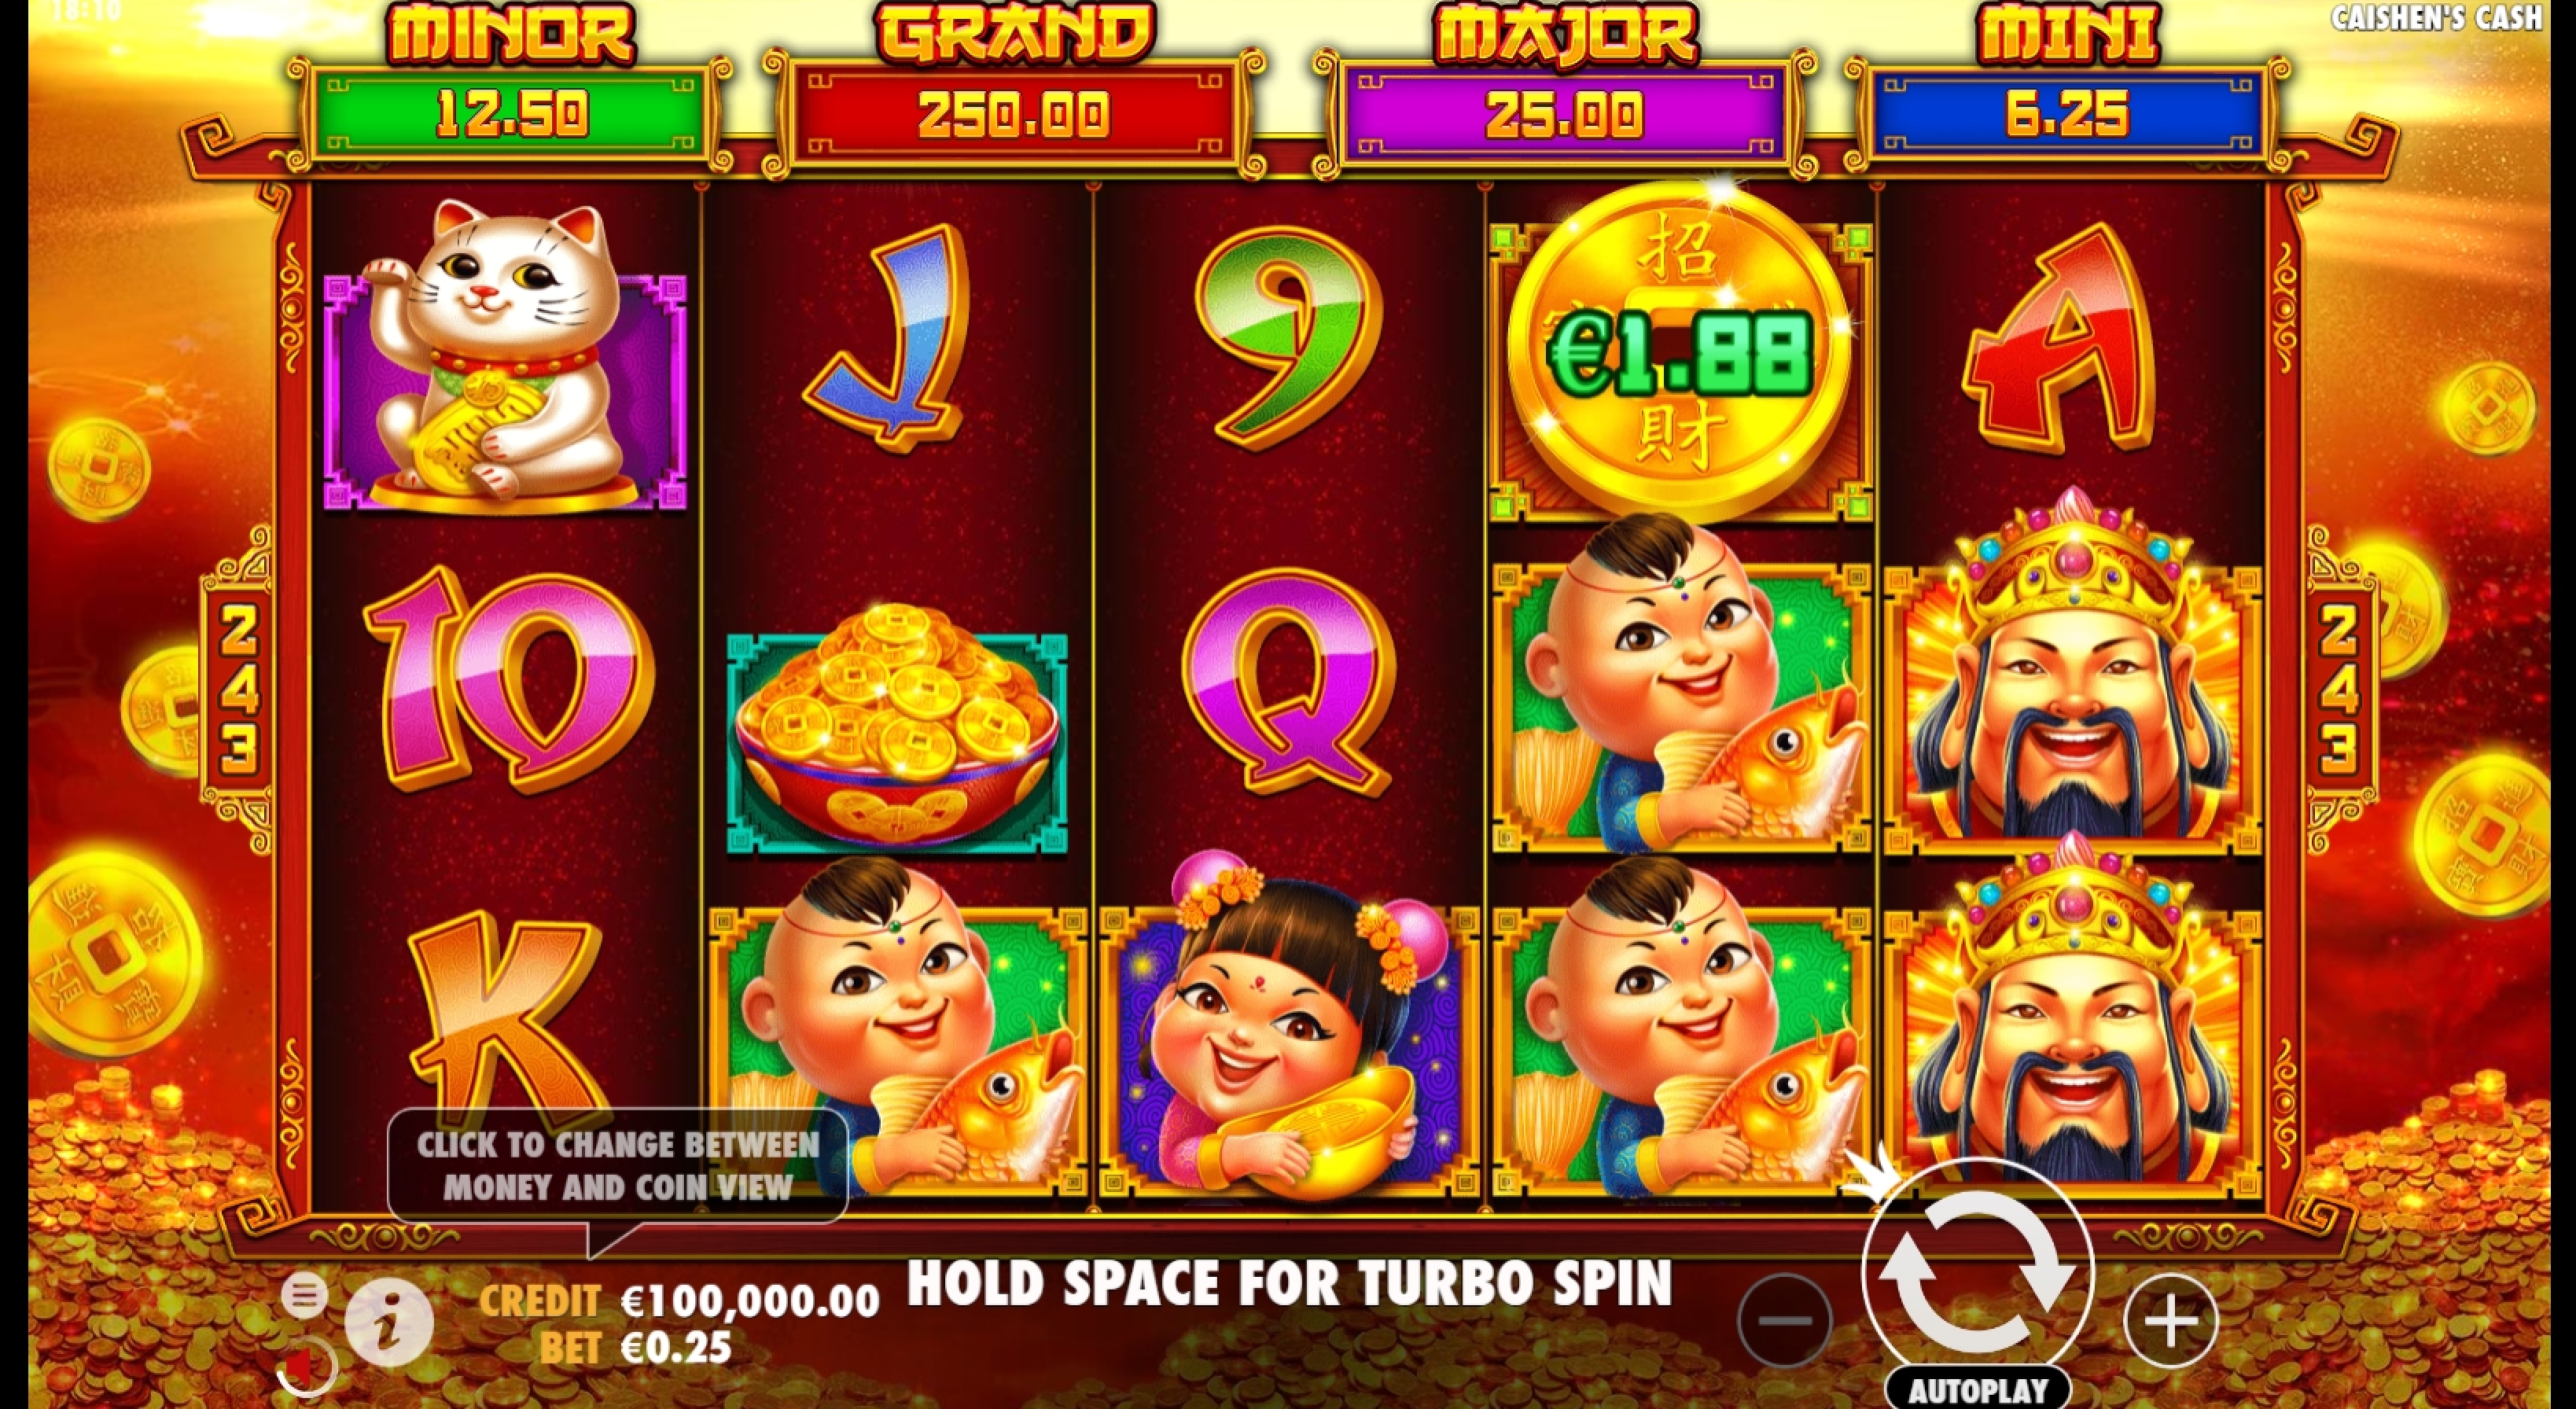 Reels in Caishen's Cash Slot Game by Pragmatic Play